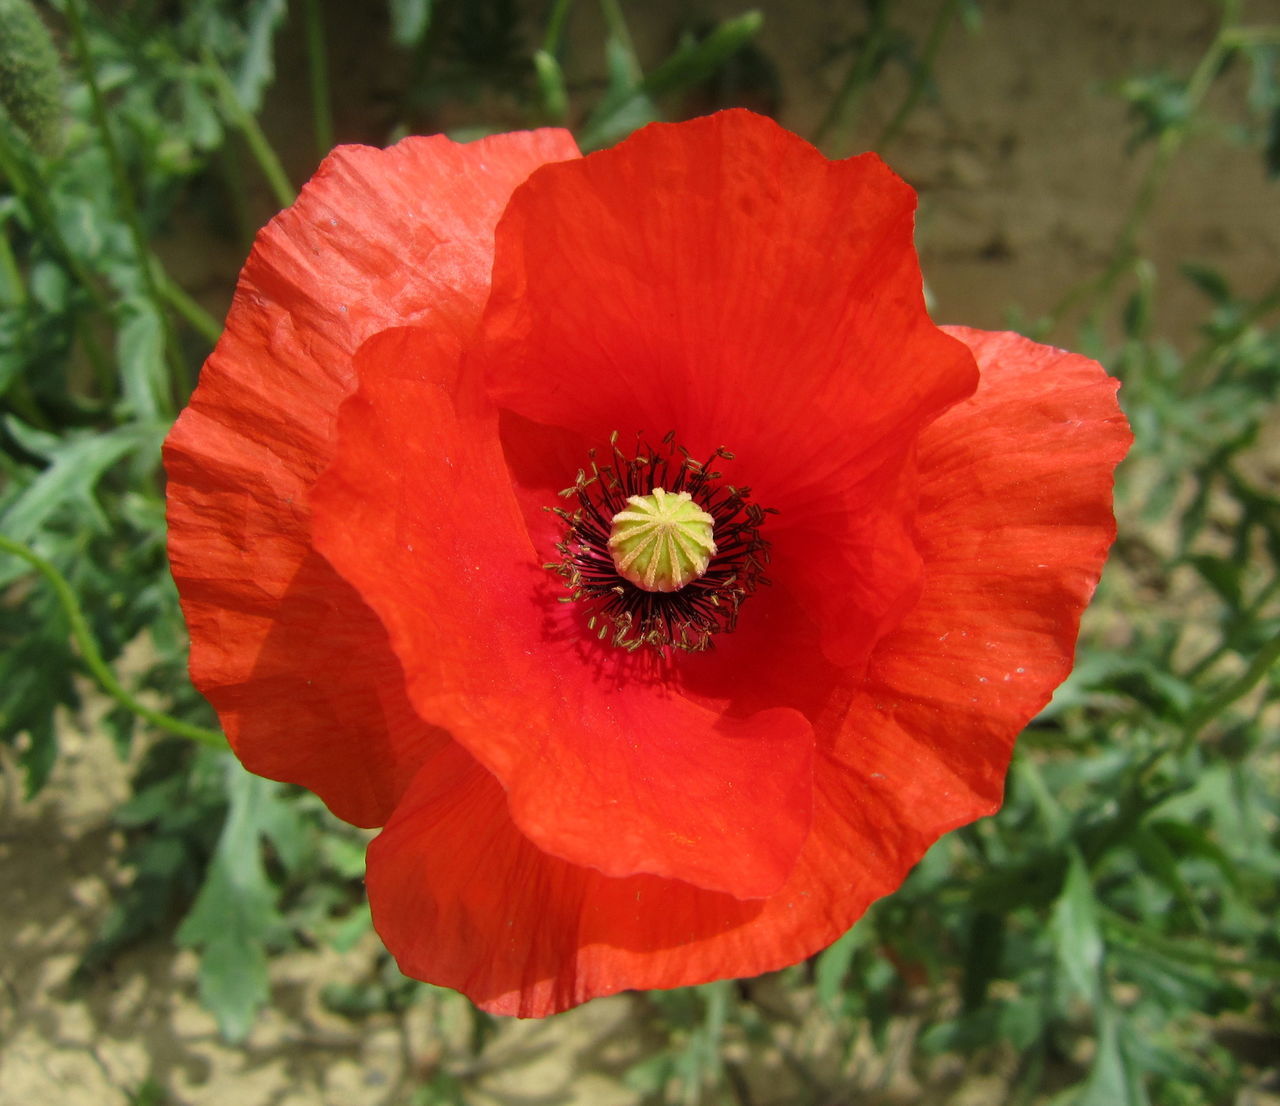 flower, flowering plant, plant, freshness, petal, flower head, inflorescence, beauty in nature, red, poppy, close-up, fragility, growth, nature, pollen, focus on foreground, no people, stamen, outdoors, blossom, botany, land, day, macro photography